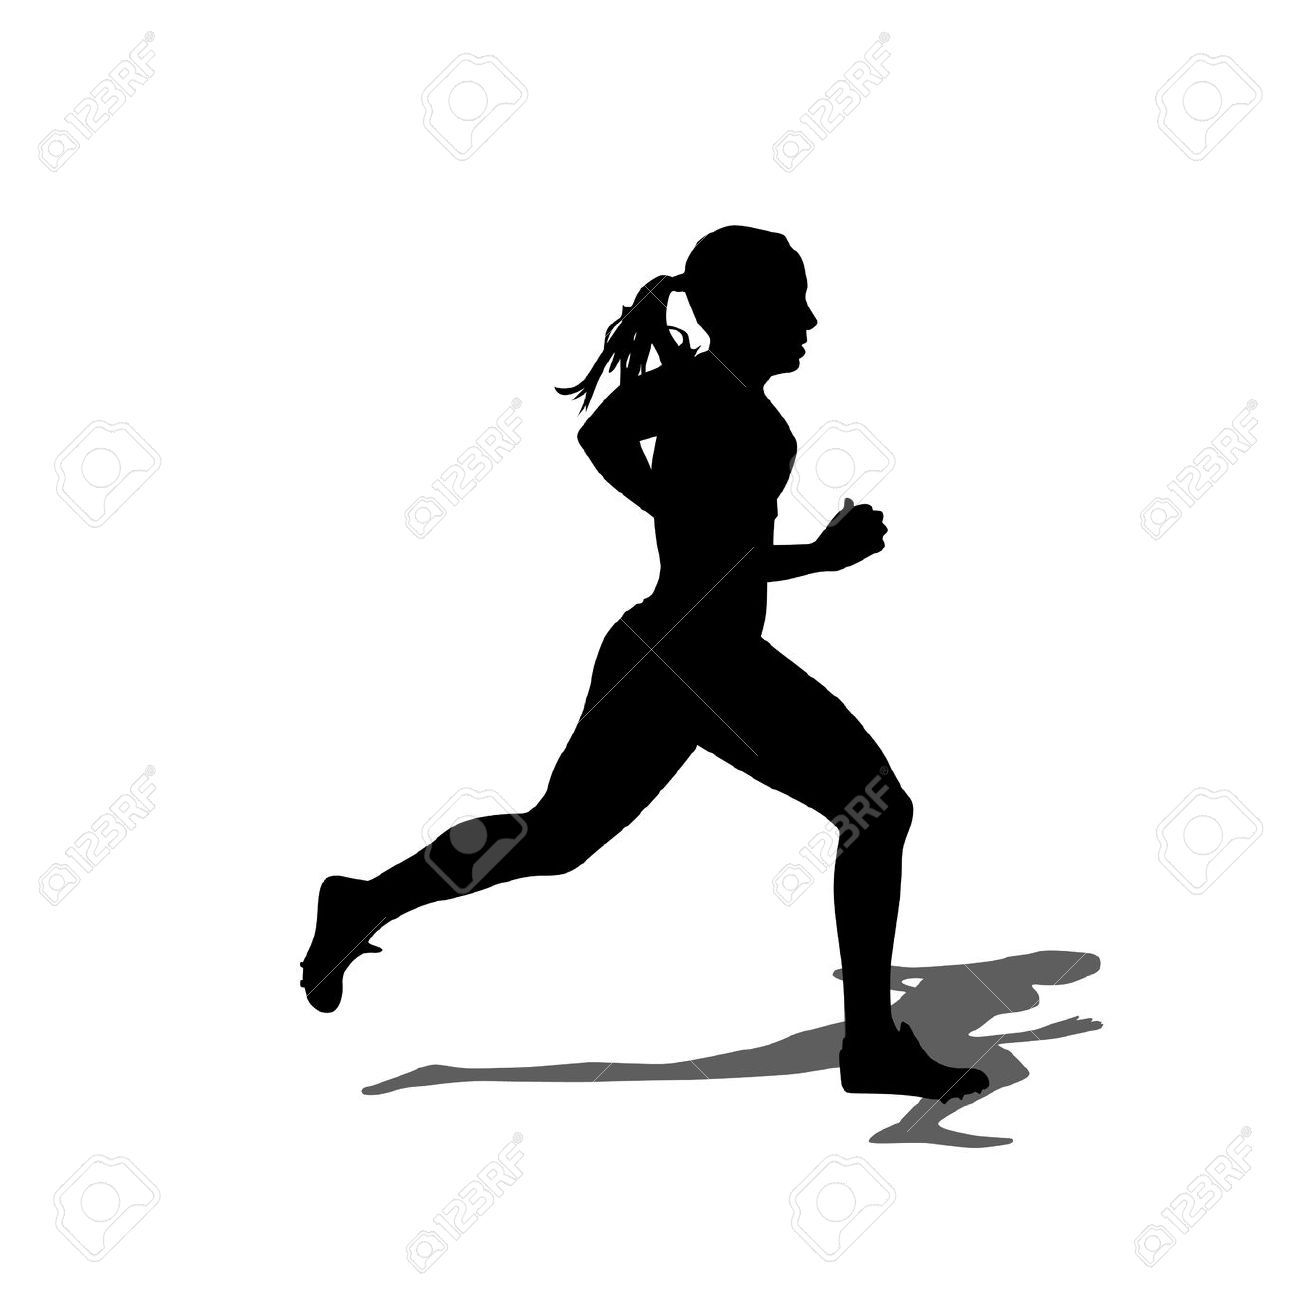 Female Athletes Stock Vector Illustration And Royalty Free